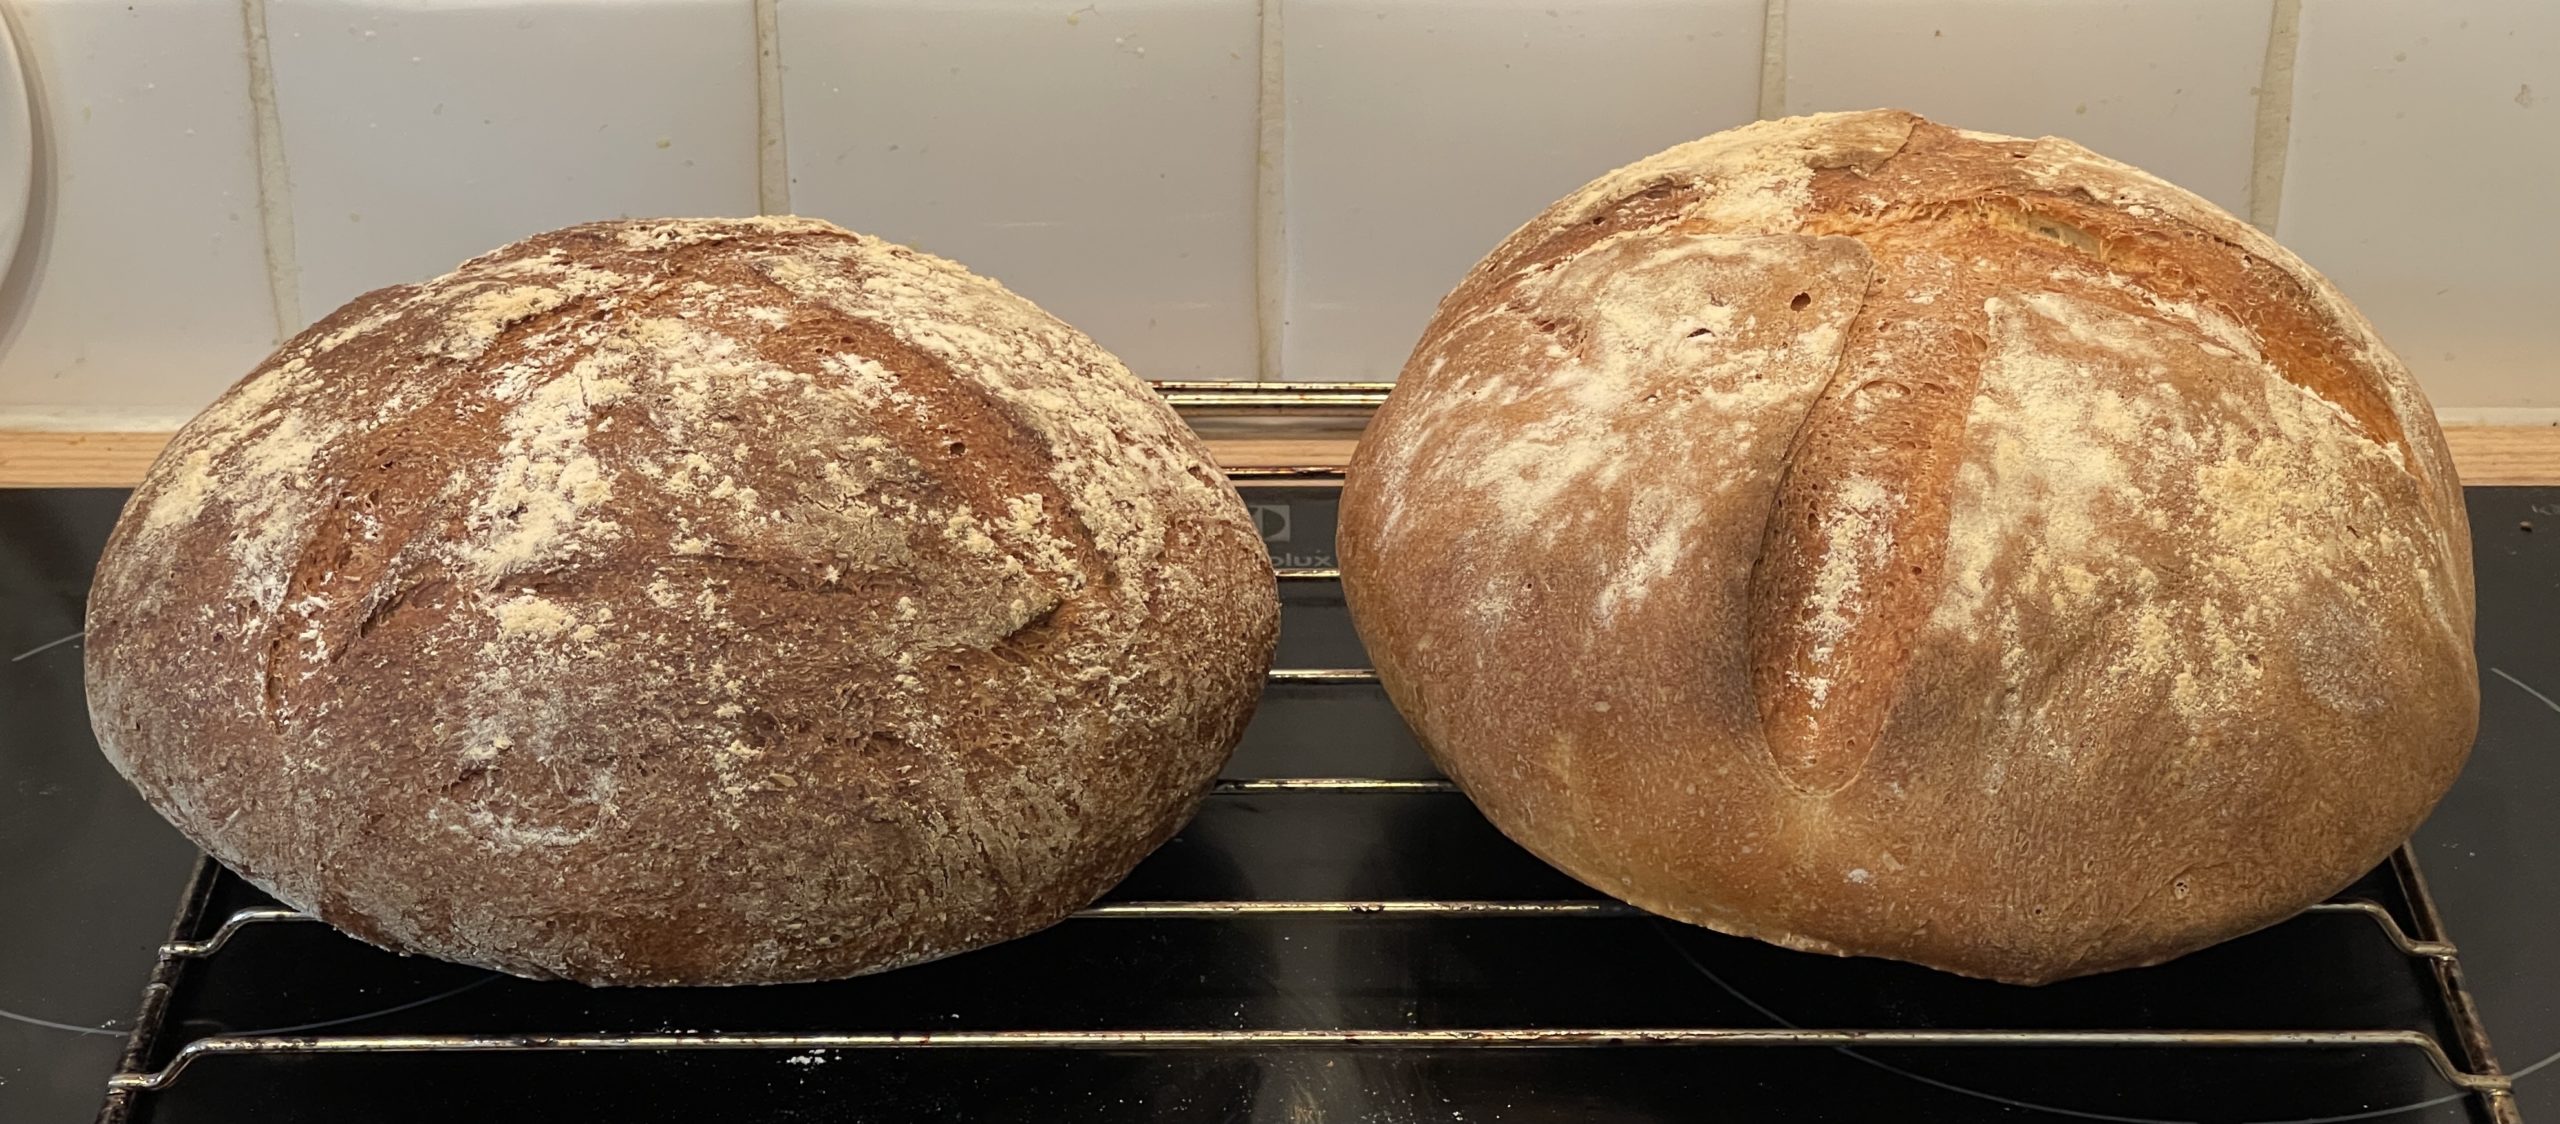 Fresh baked bread​ wholemeal and white loaves